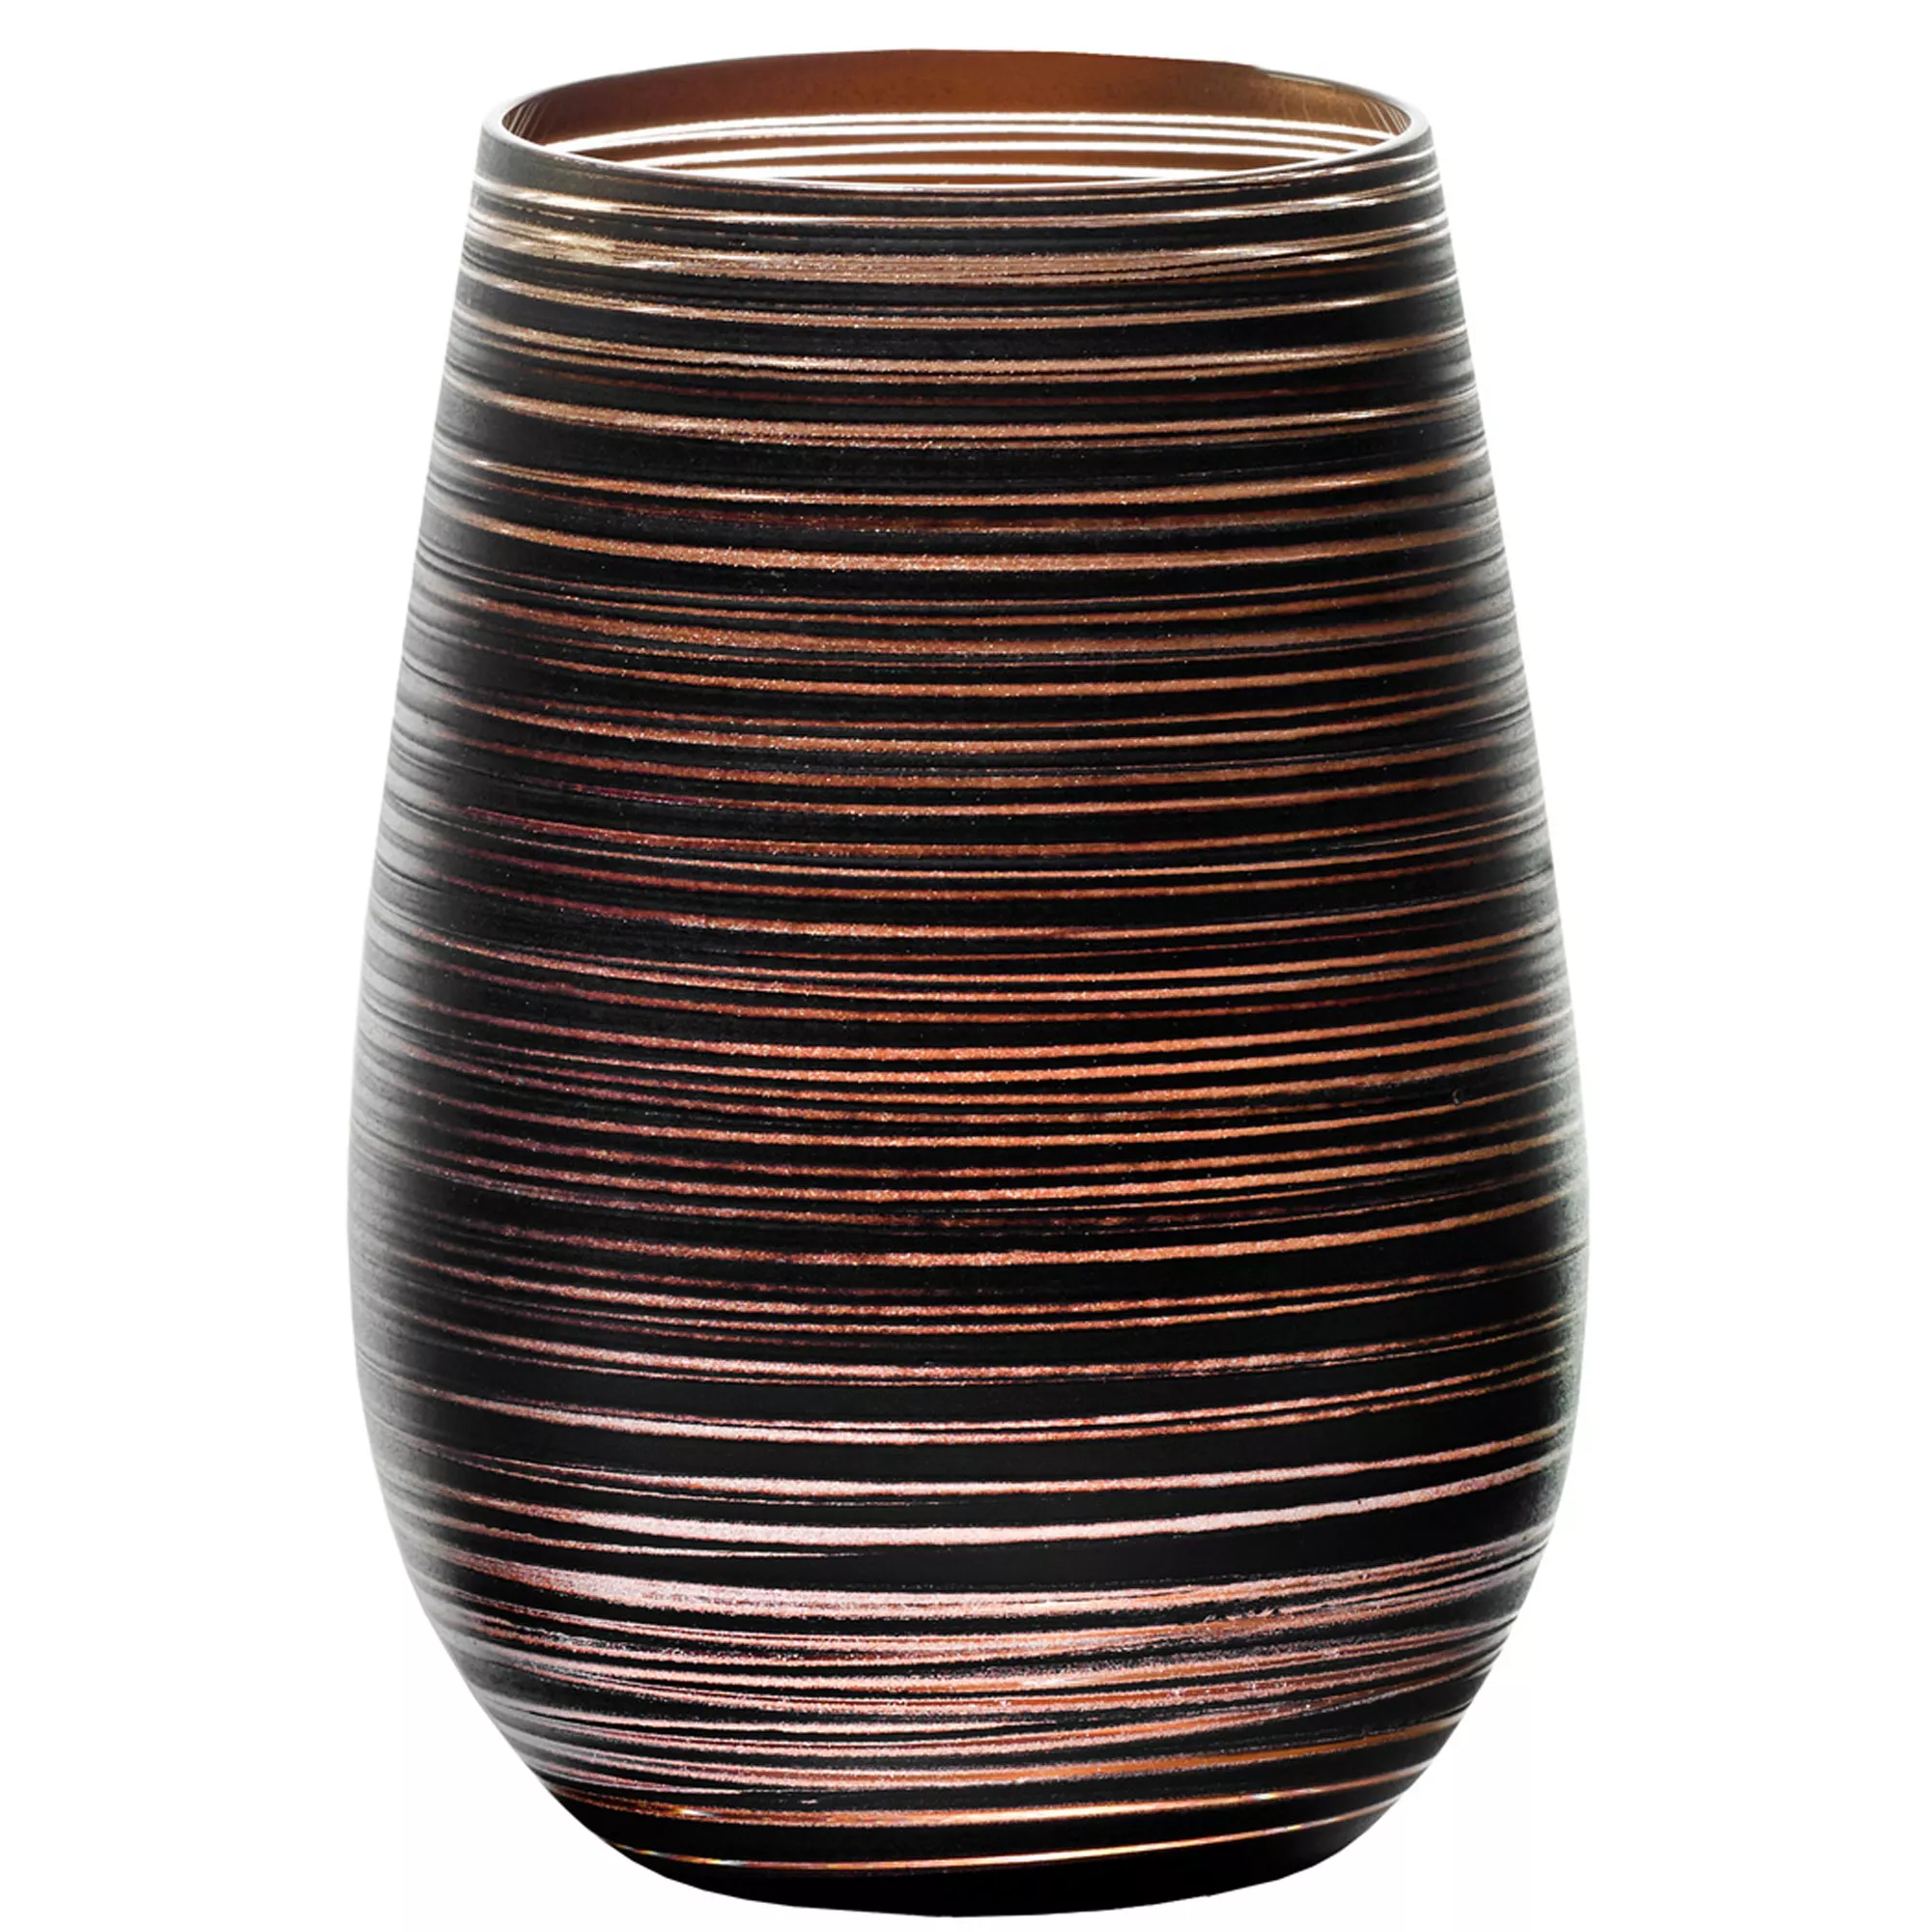 Tumbler from the series 'Twister' by Stölzle in black-bronze - 465ml (1